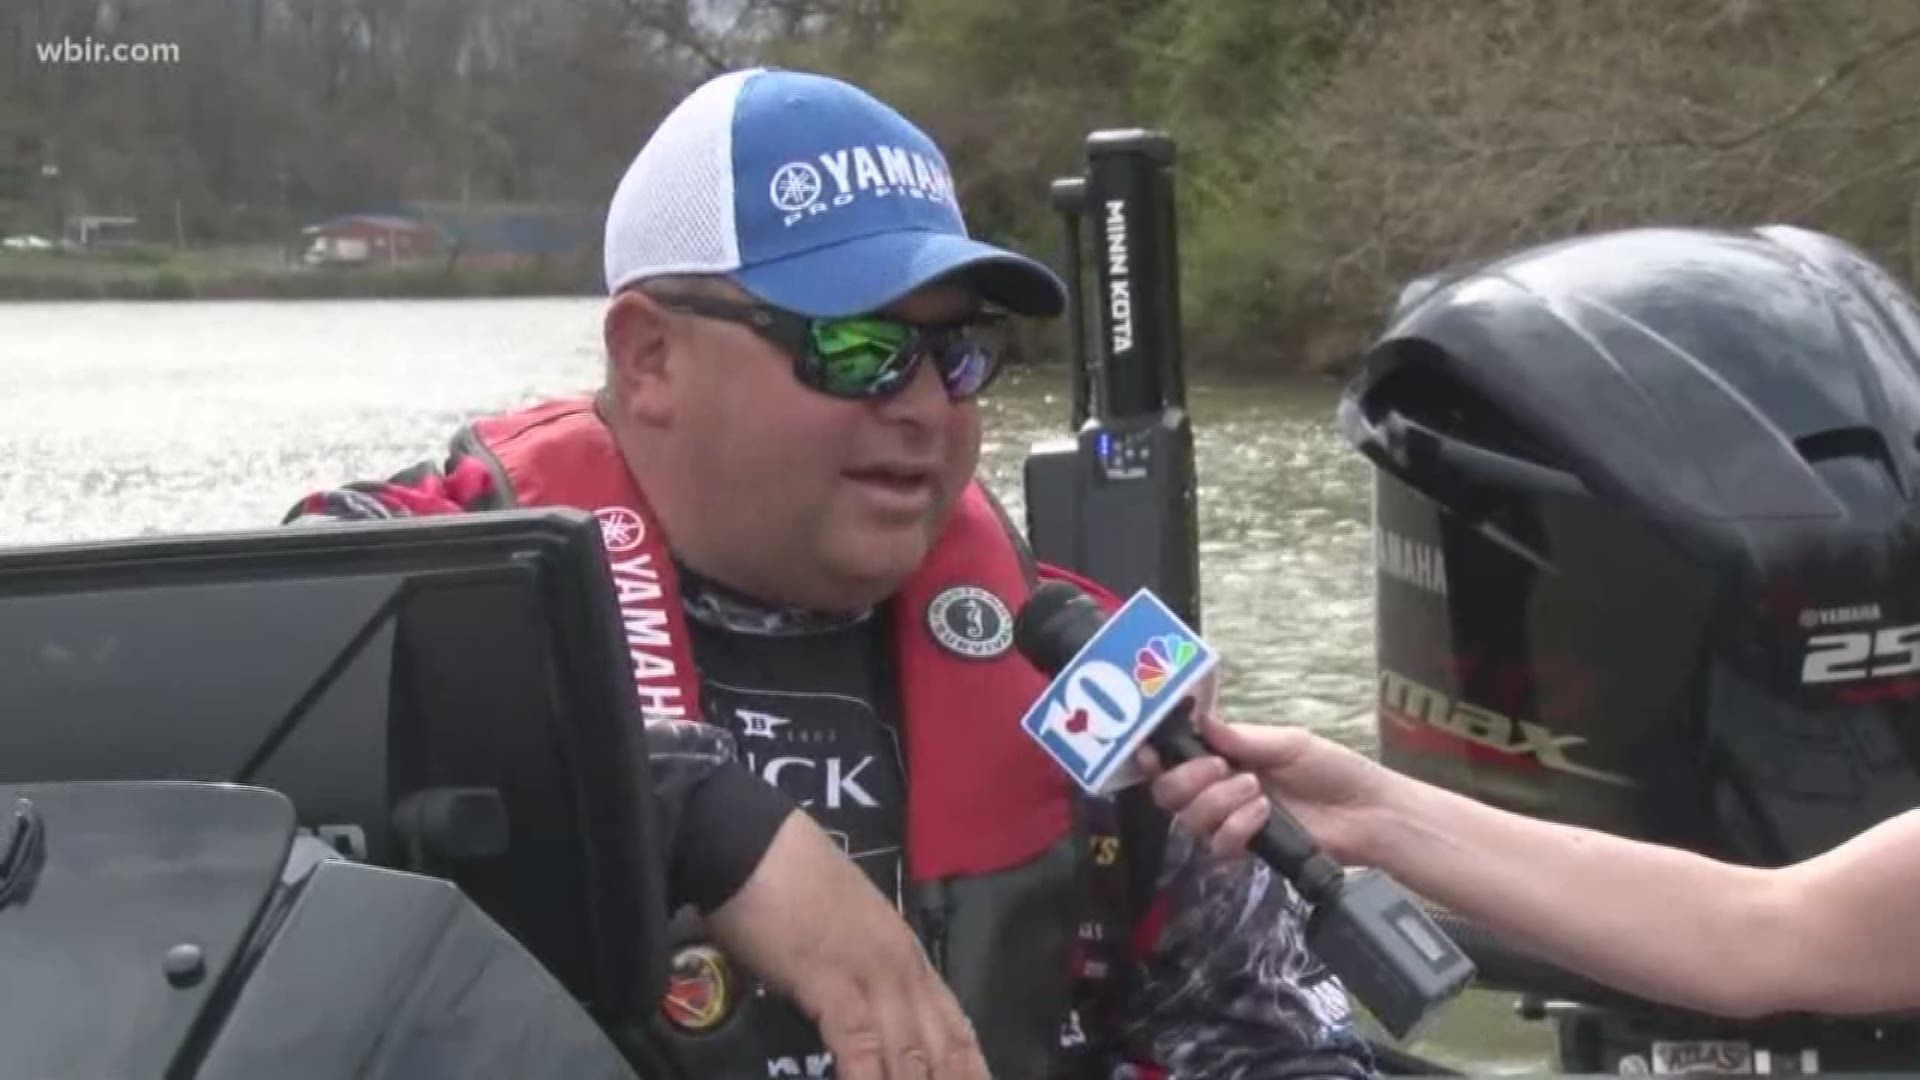 Bill Lowen is a Bassmaster Elite Series Angler. He often takes his family to tournaments where they camp out together and enjoy the fun atmosphere.